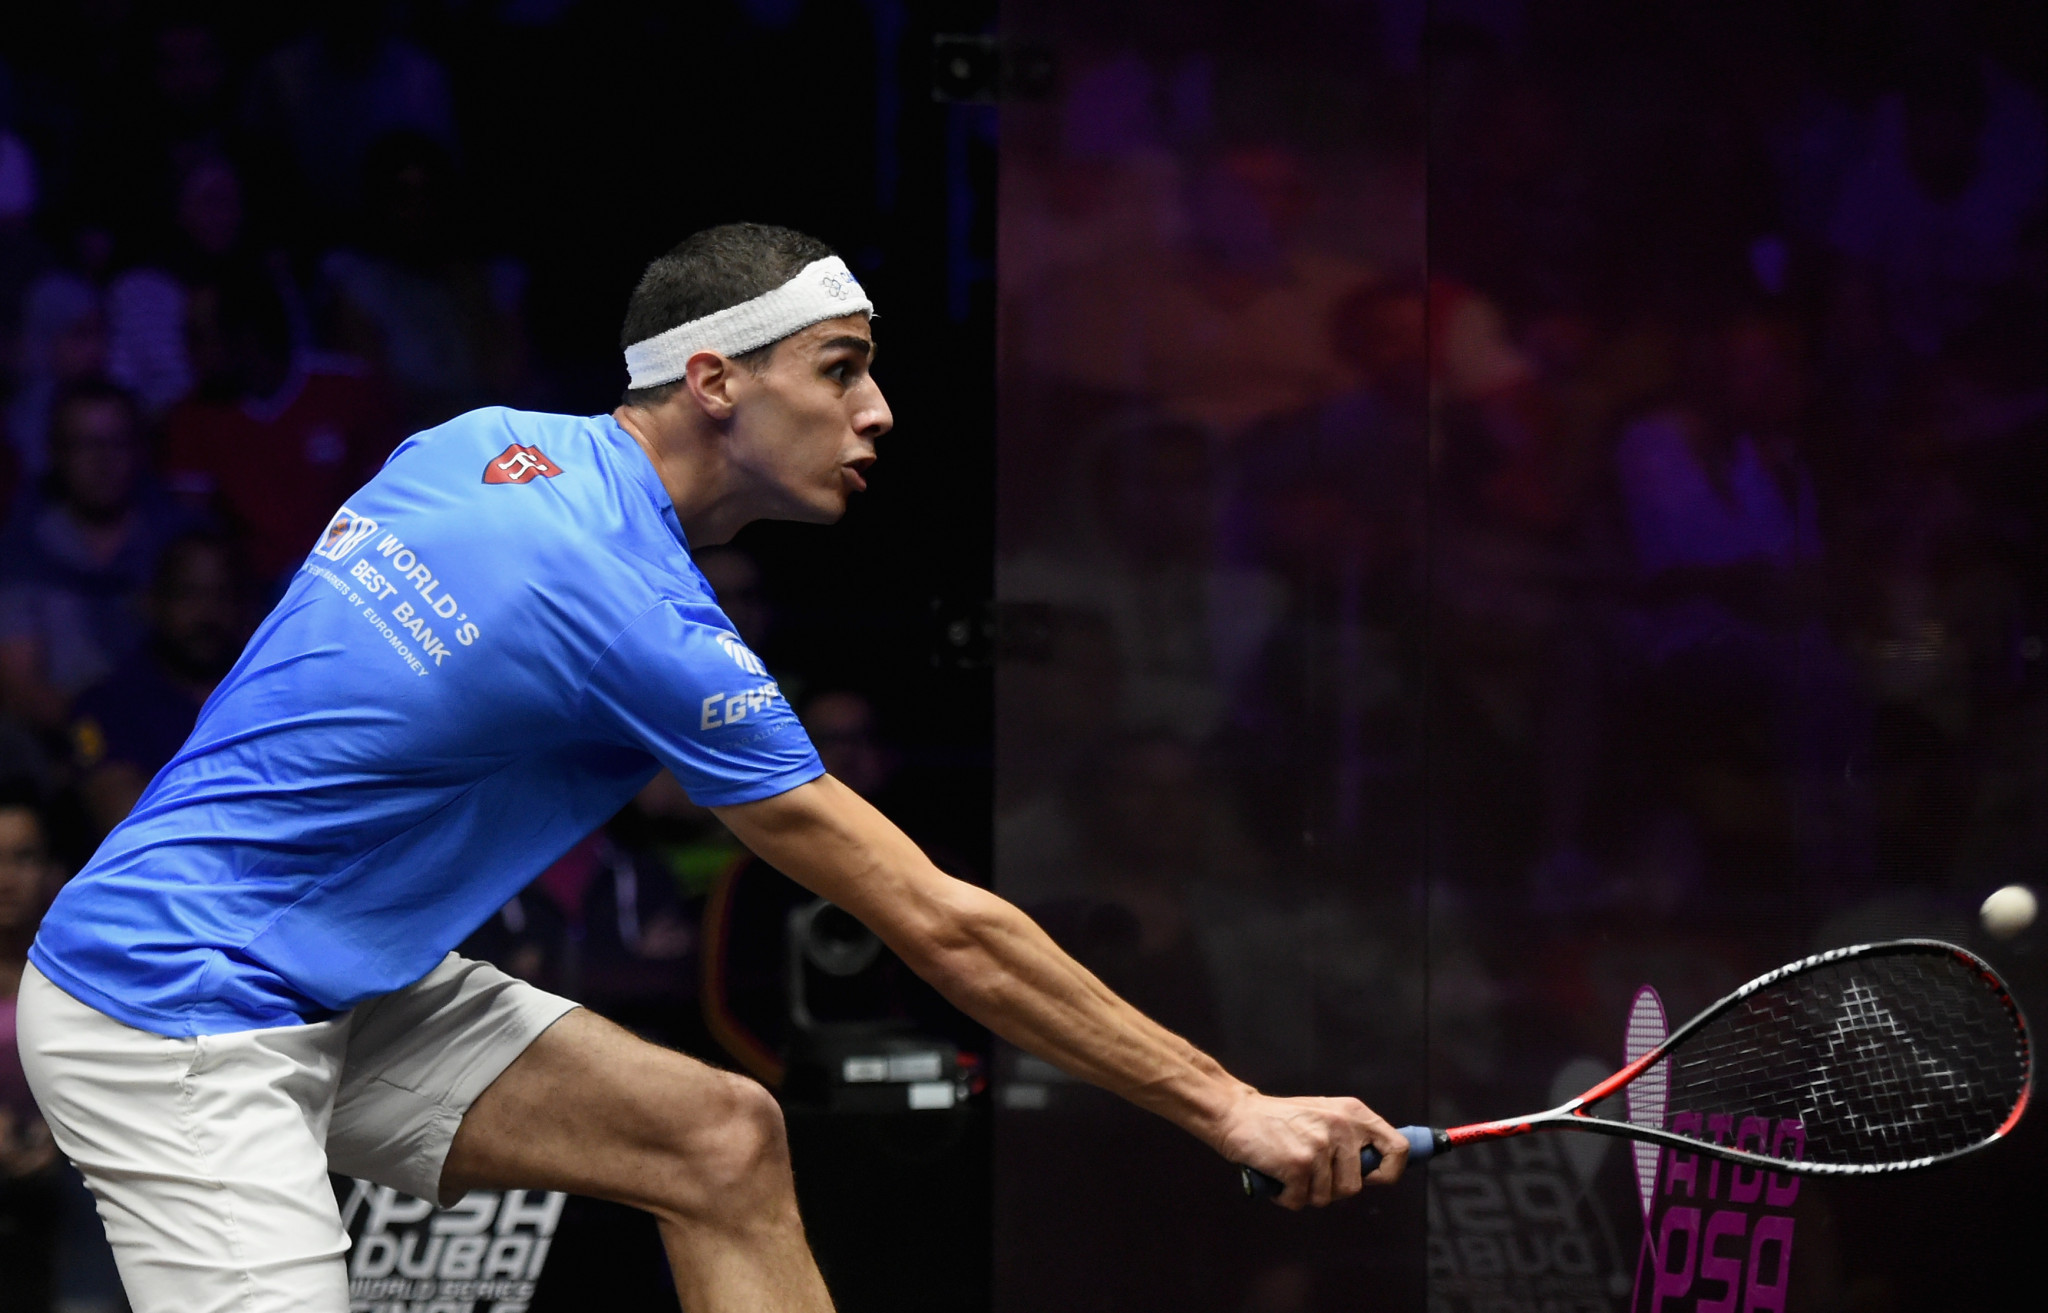 Top seed Farag sets up all-Egpyt semi-final with Momen at Canary Wharf Classic